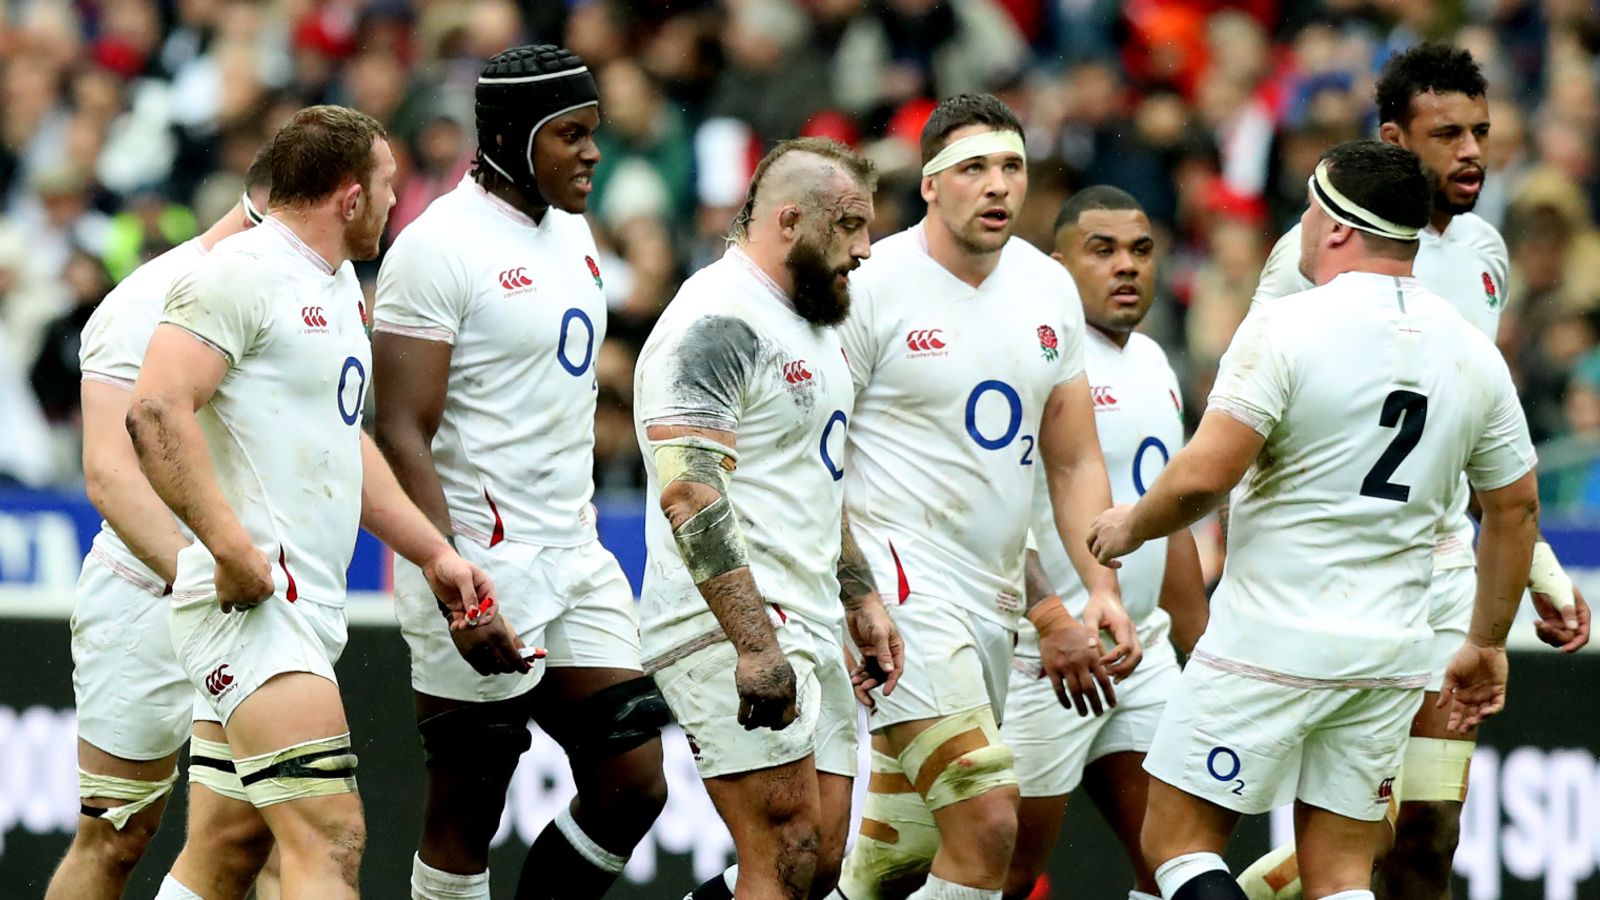 Rugby Union Initiatives announced to protect England and Premiership